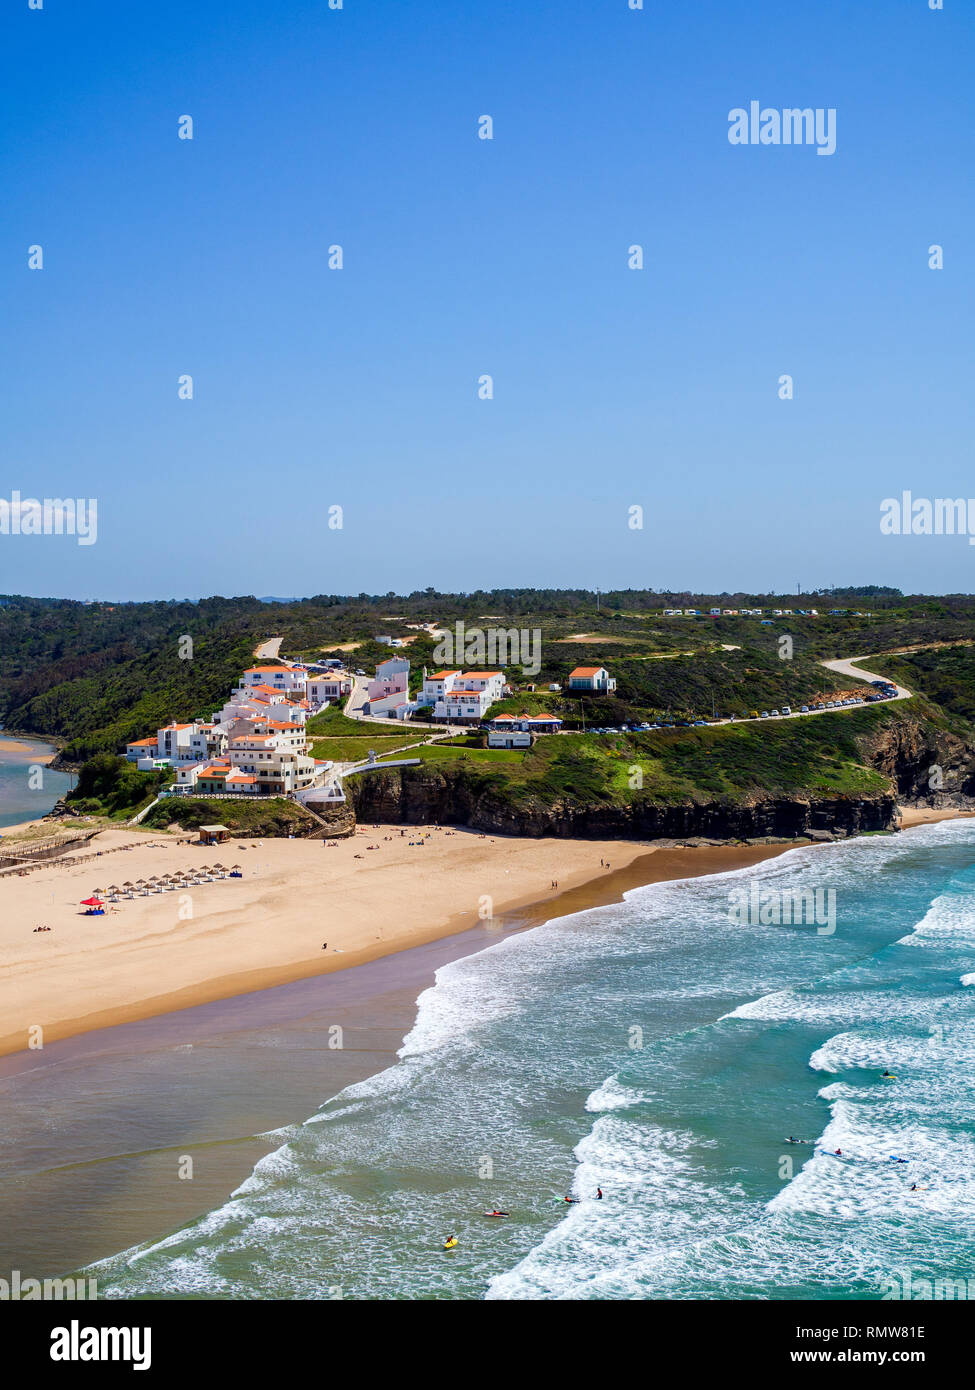 A view over Praia de Odeceixe, the beach of Odeceixe, southern Portugal from the Rota Vicentina walking trail. Stock Photo